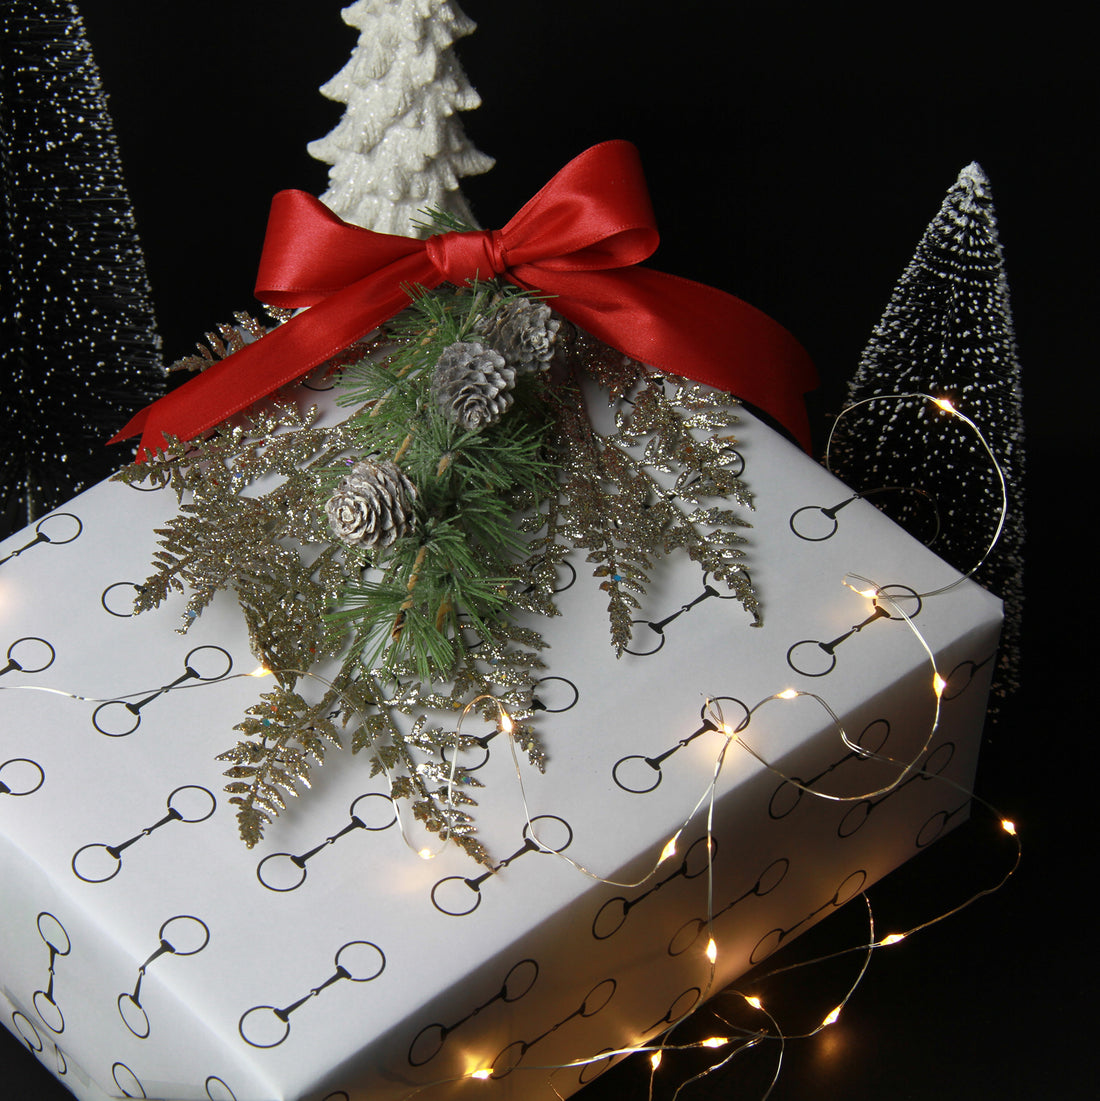 Equestrian Holiday Gift Wrap Ideas for Horse Lovers